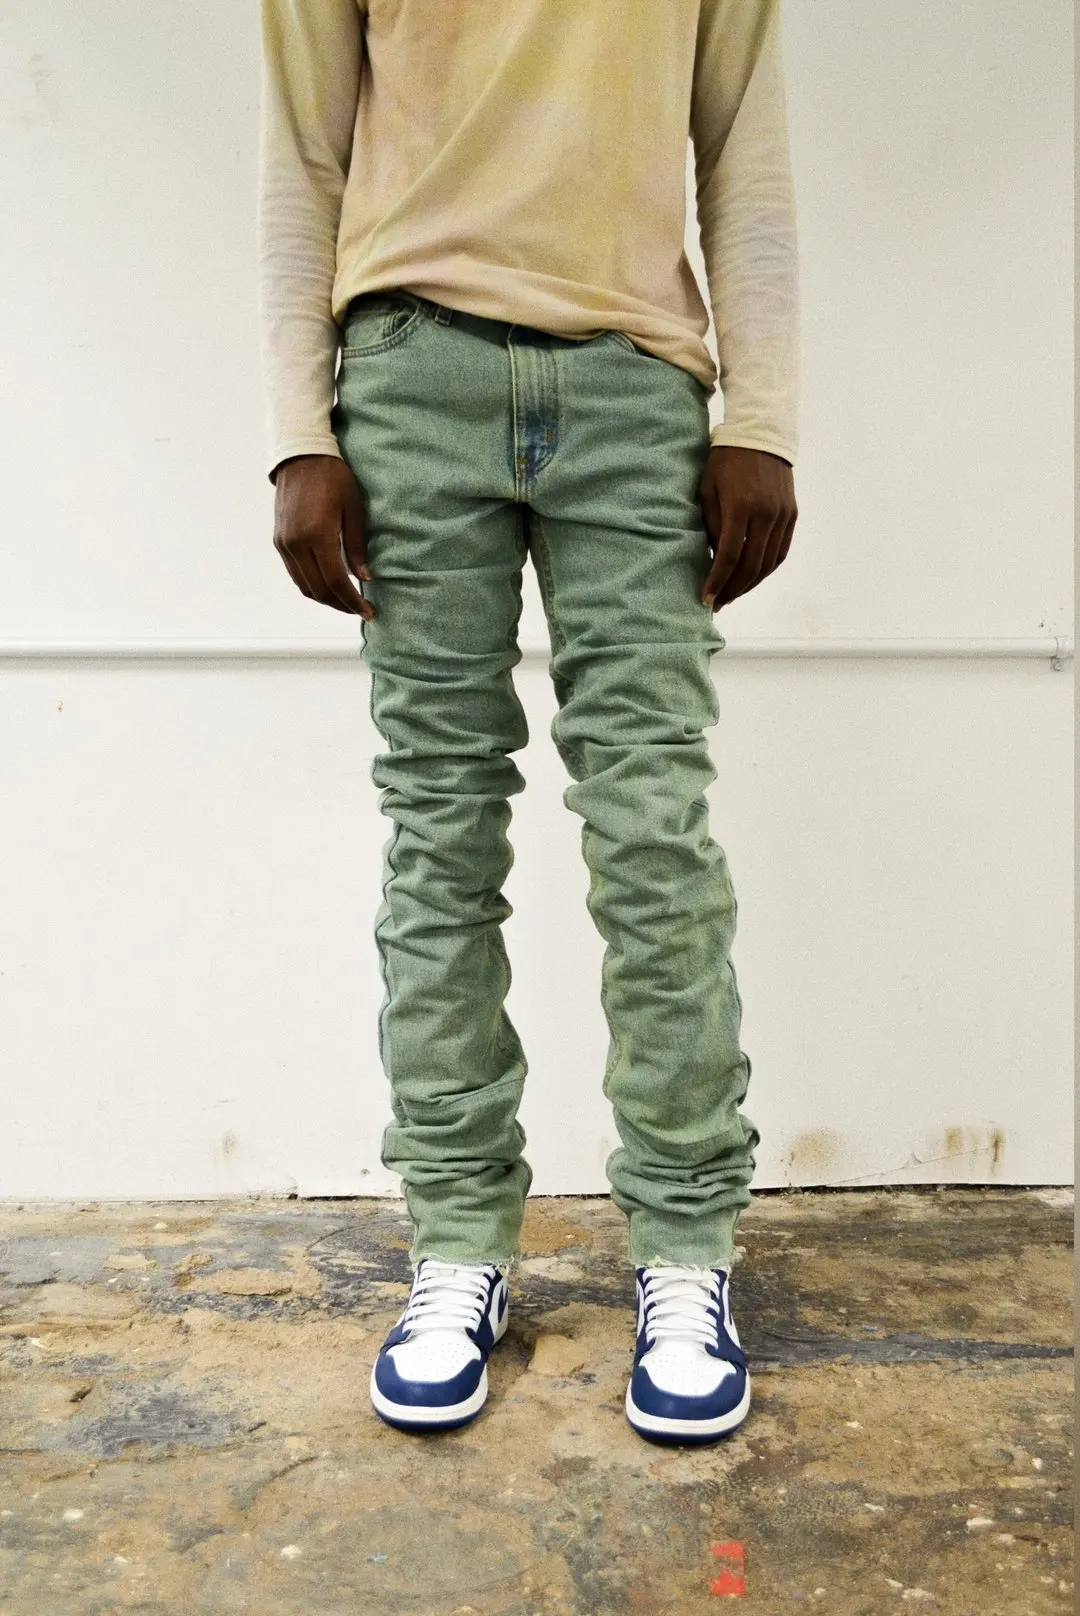 stacked jeans mens